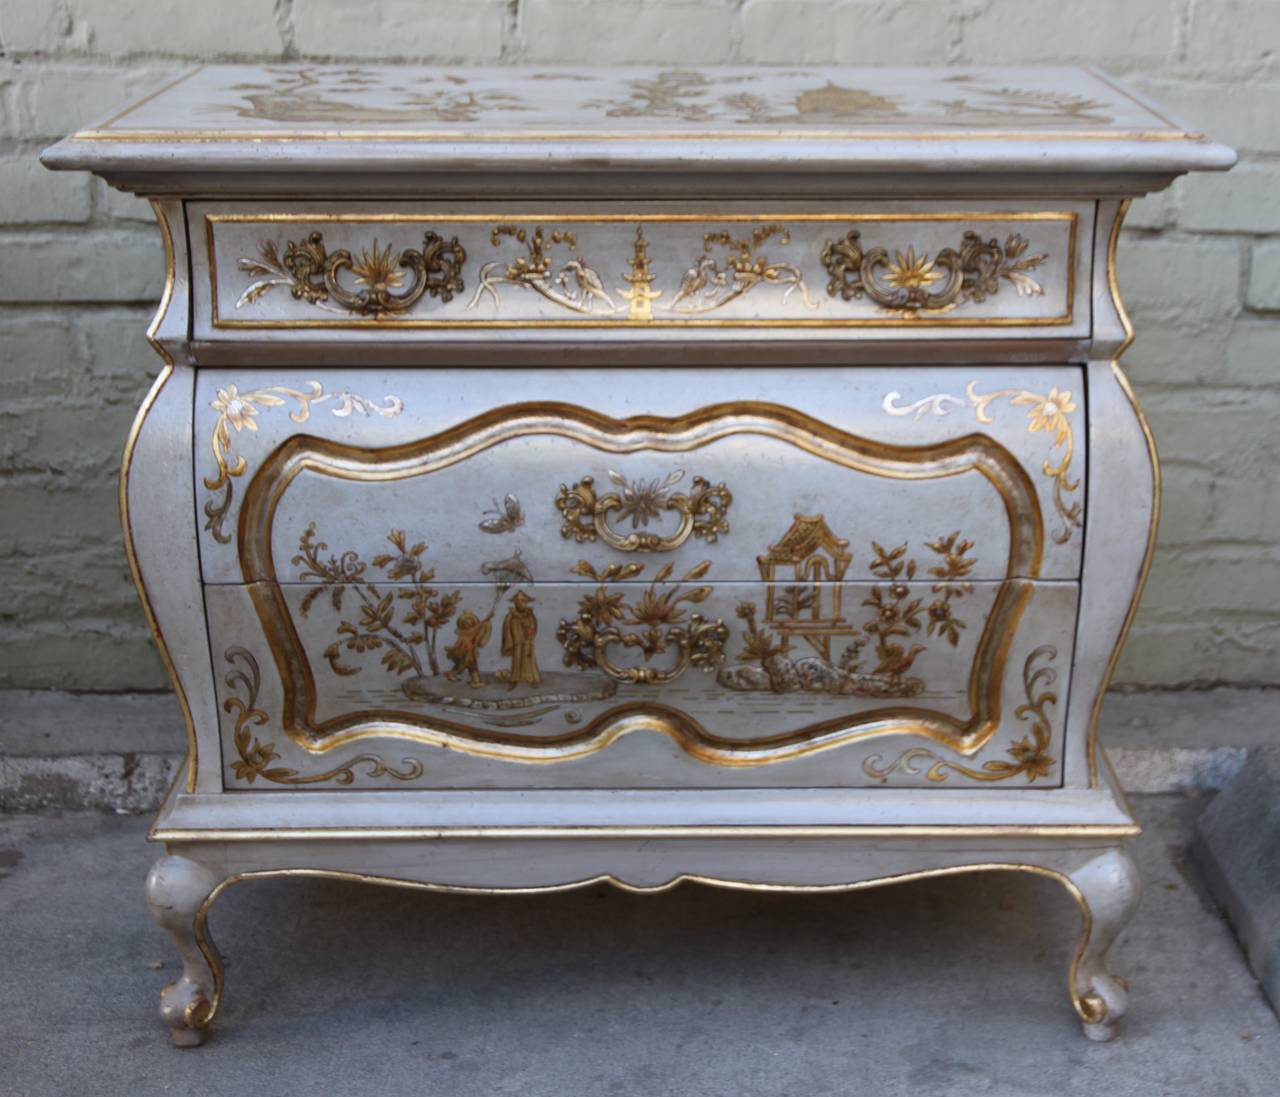 Pair of French chinoiserie painted chests standing on four cabriole legs.